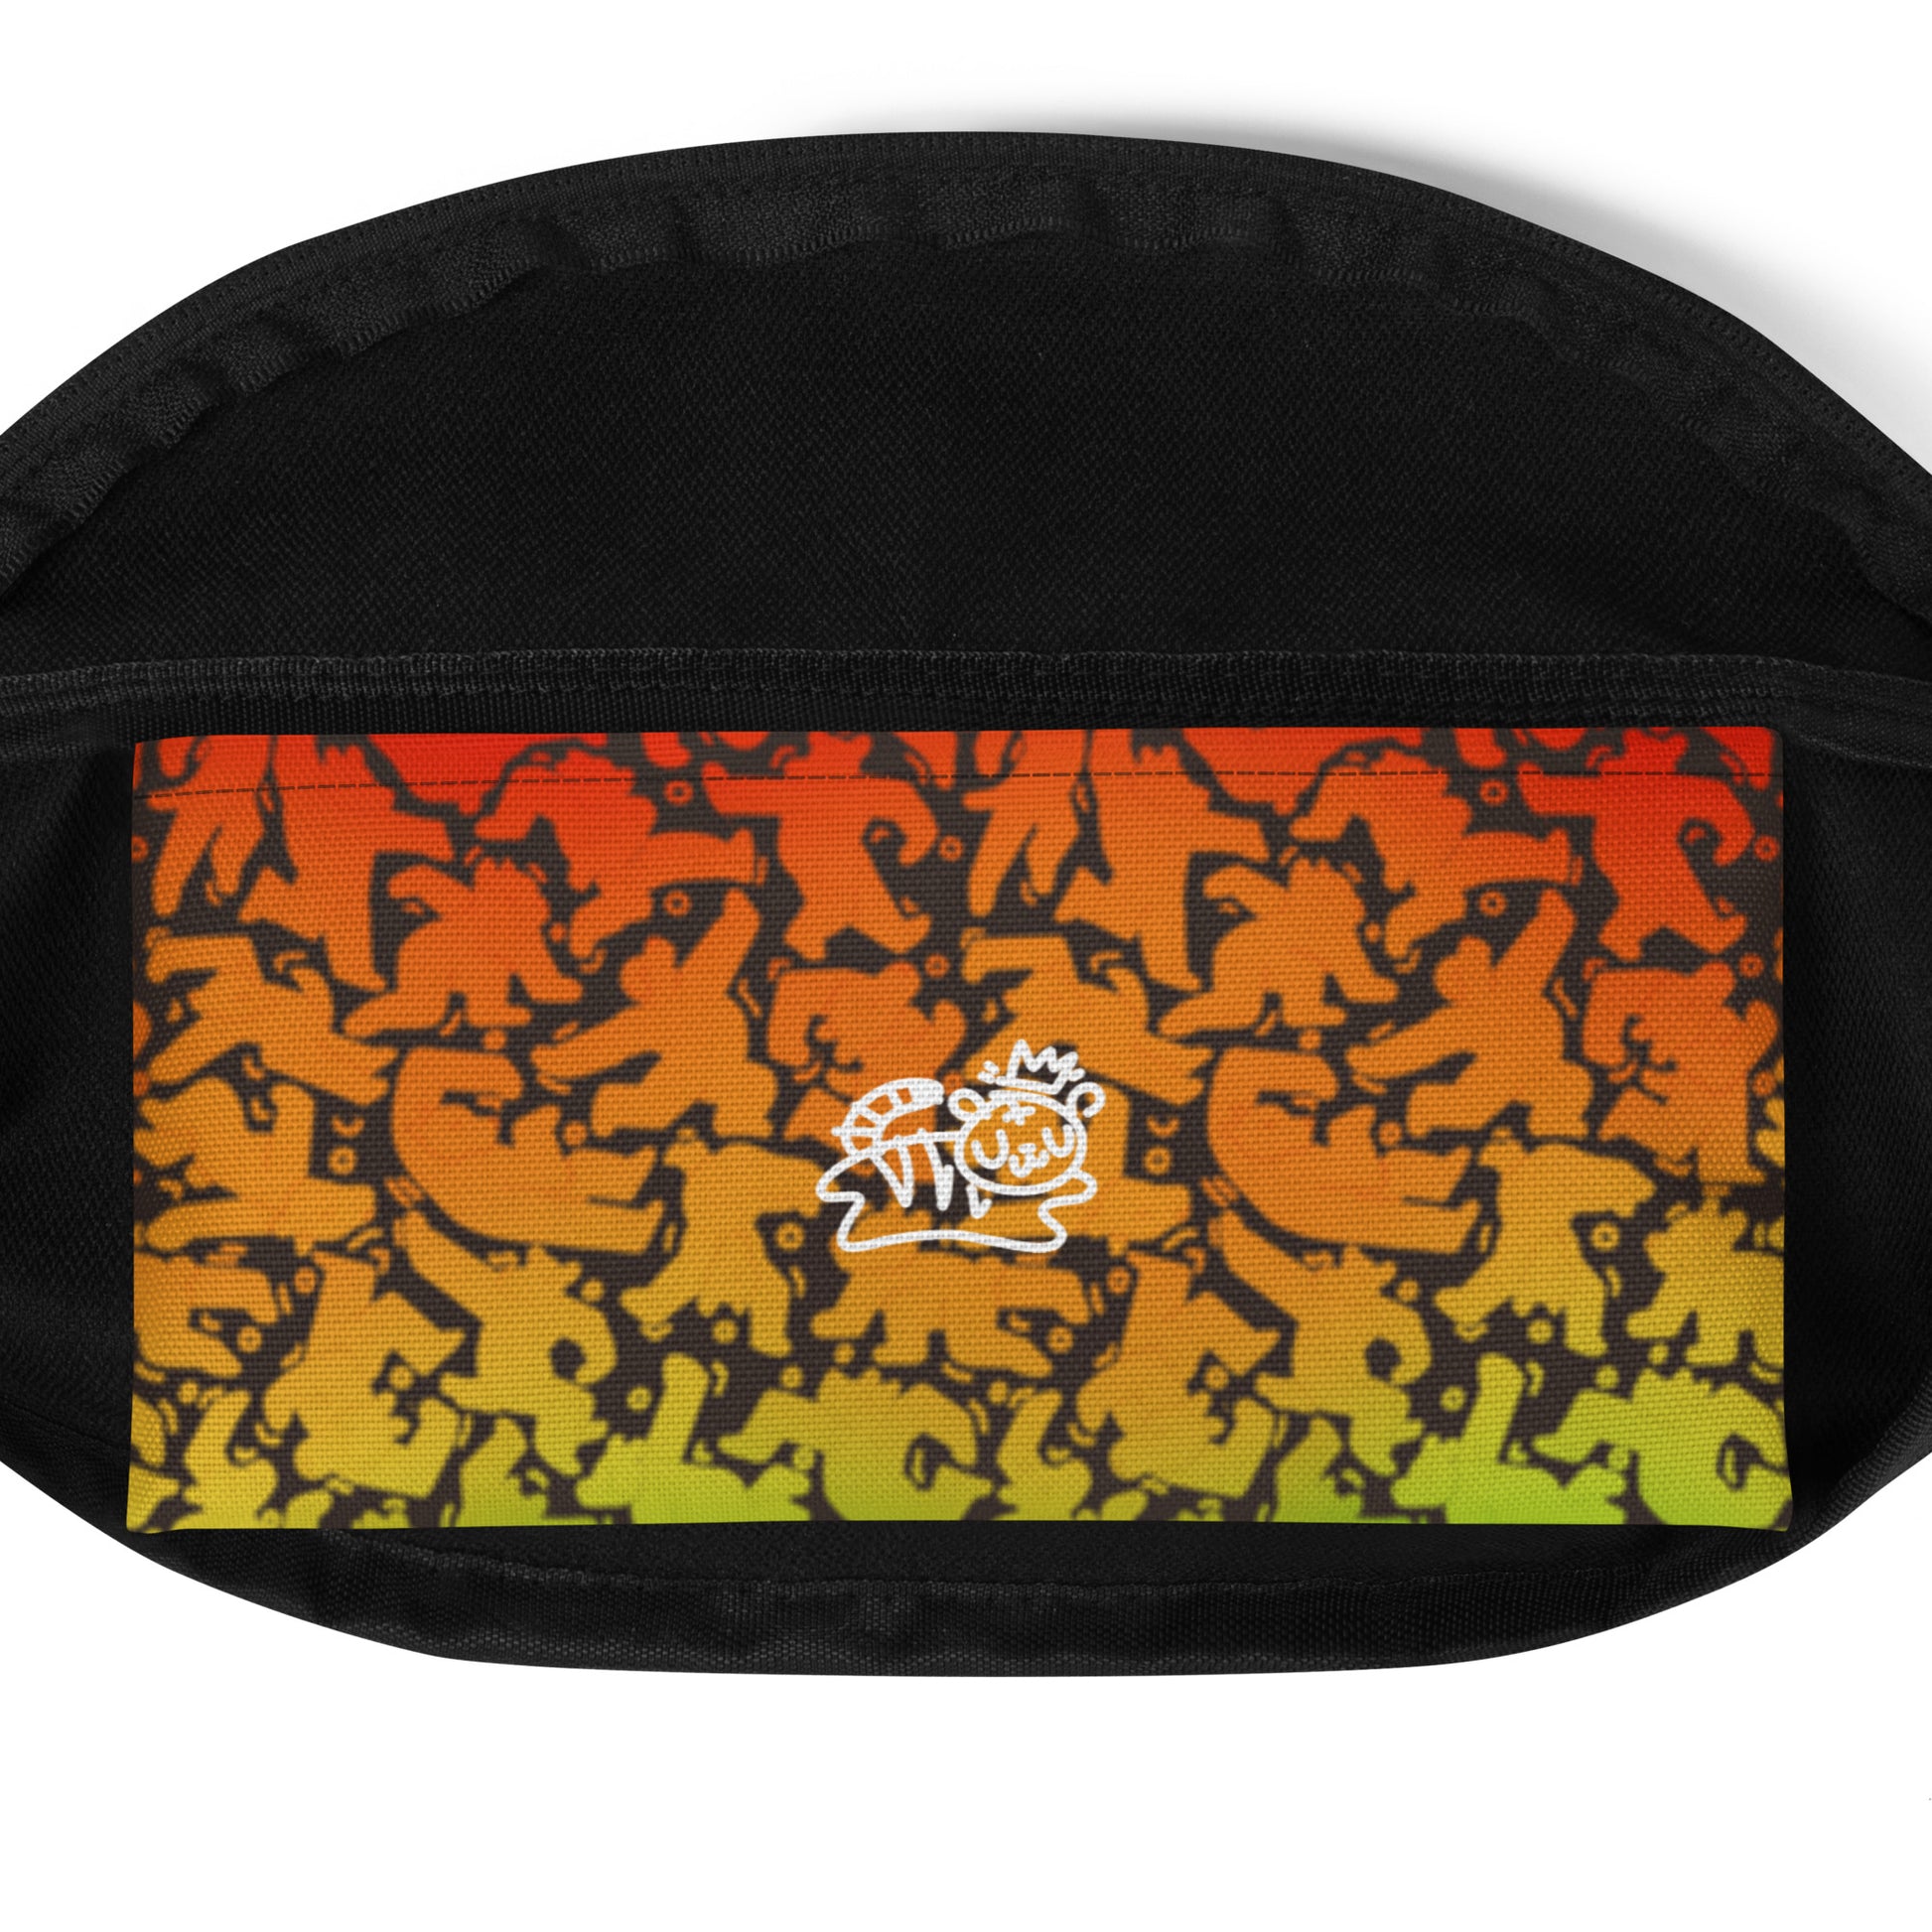 All over print fanny pack featuring rainbow bear pattern in style of Keith Haring inside pocket, featuring bolt-wear tiger logo